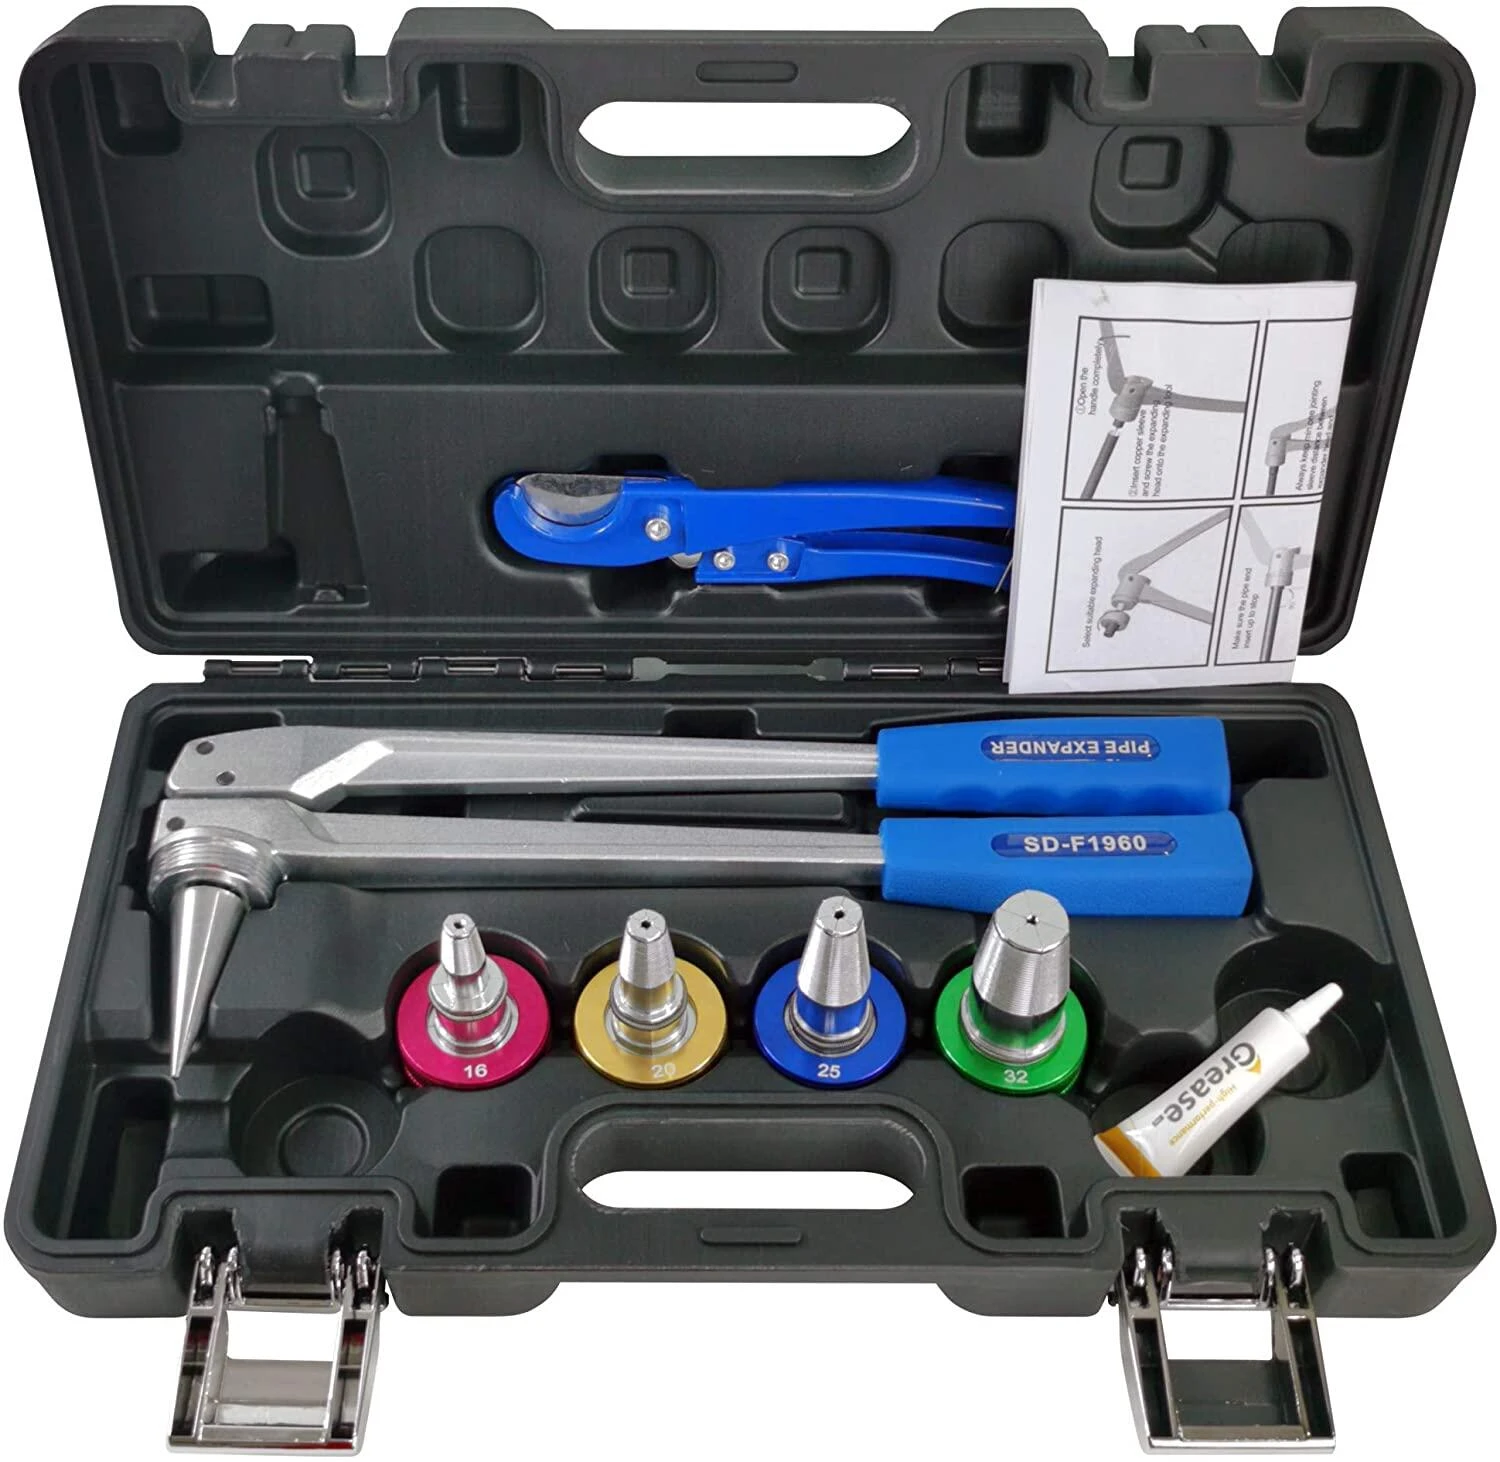 Uponor PEX Pipe Tube Expander 16,20,25,32mm ProPEX Expansion Tool Kit for Water and Radiator Connection